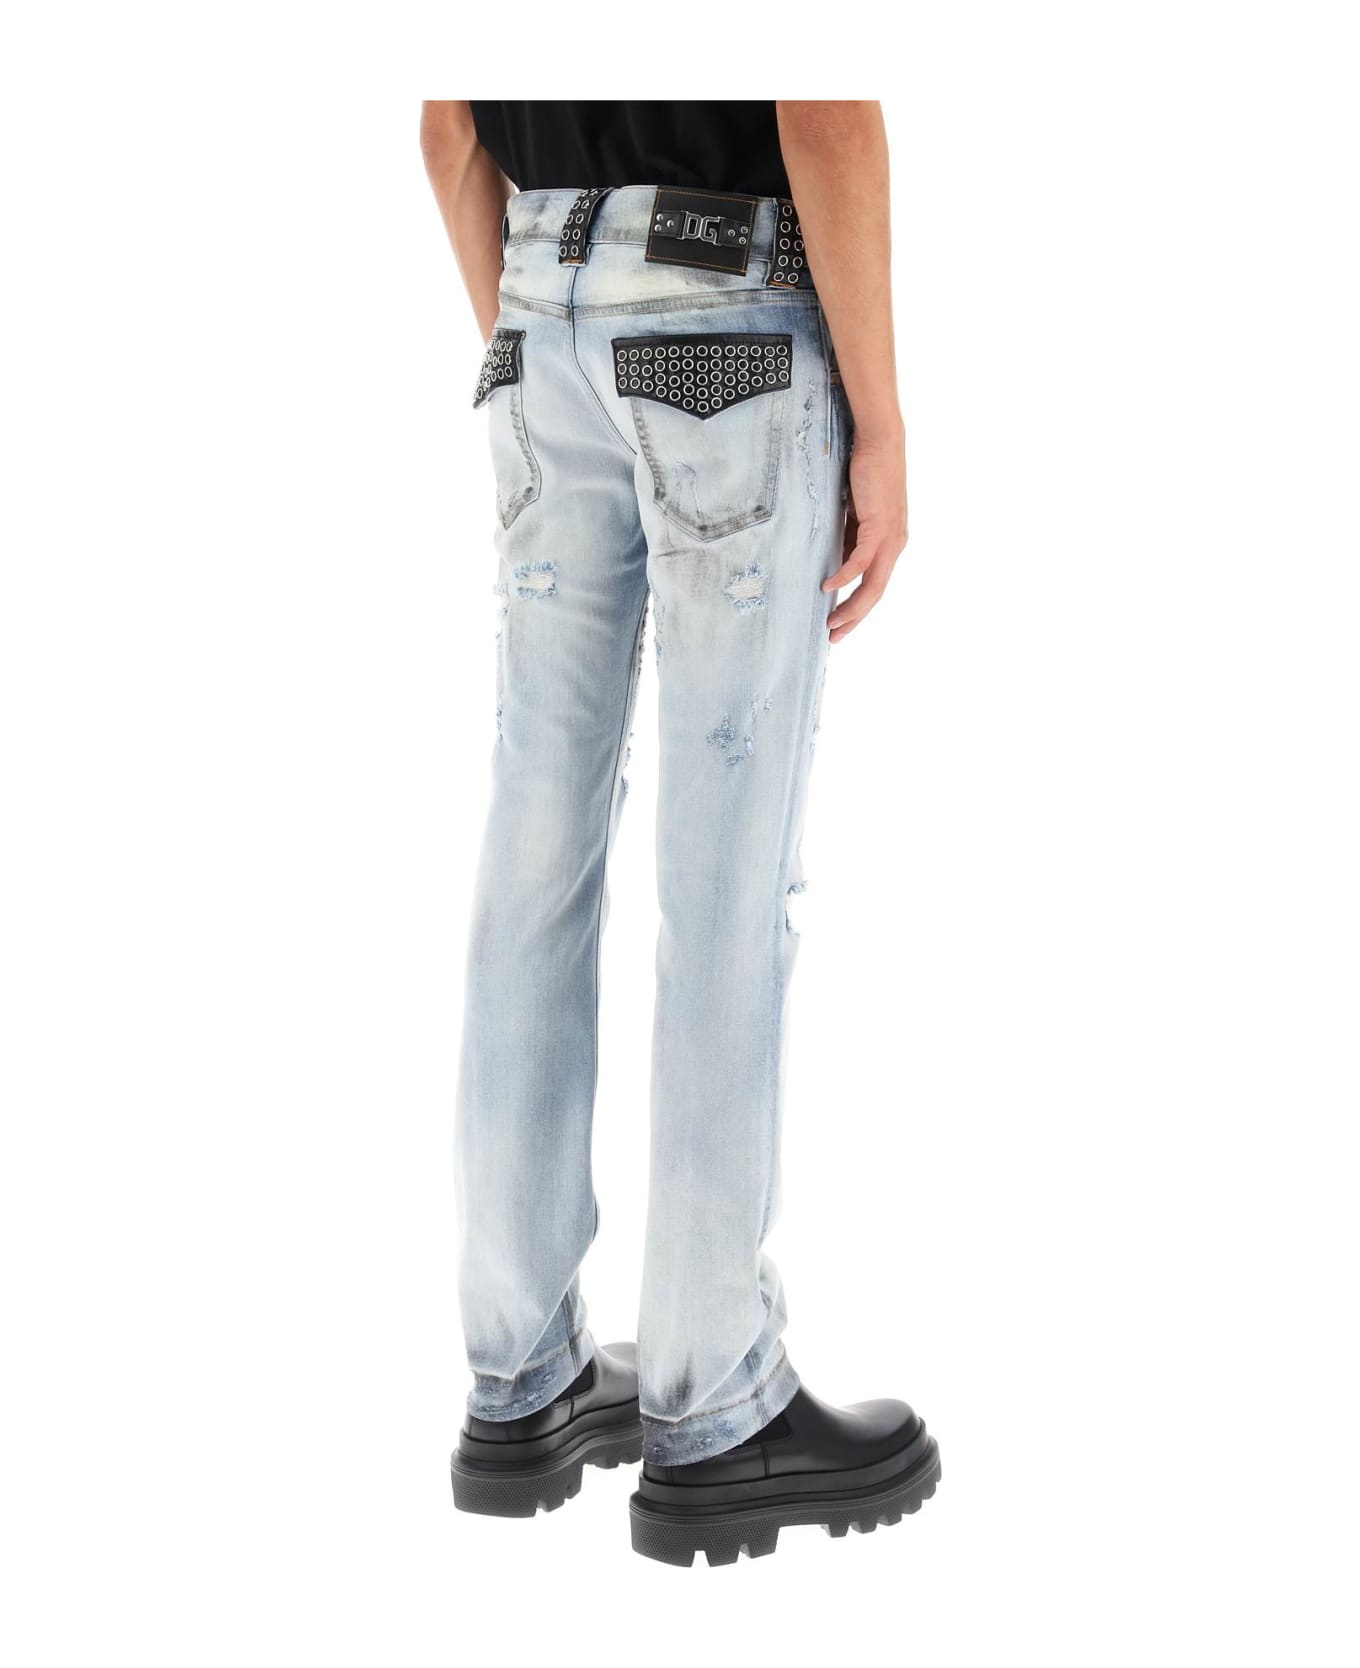 Dolce & Gabbana Re-edition Jeans With Leather Detailing - VARIANTE ABBINATA (Light blue) デニム